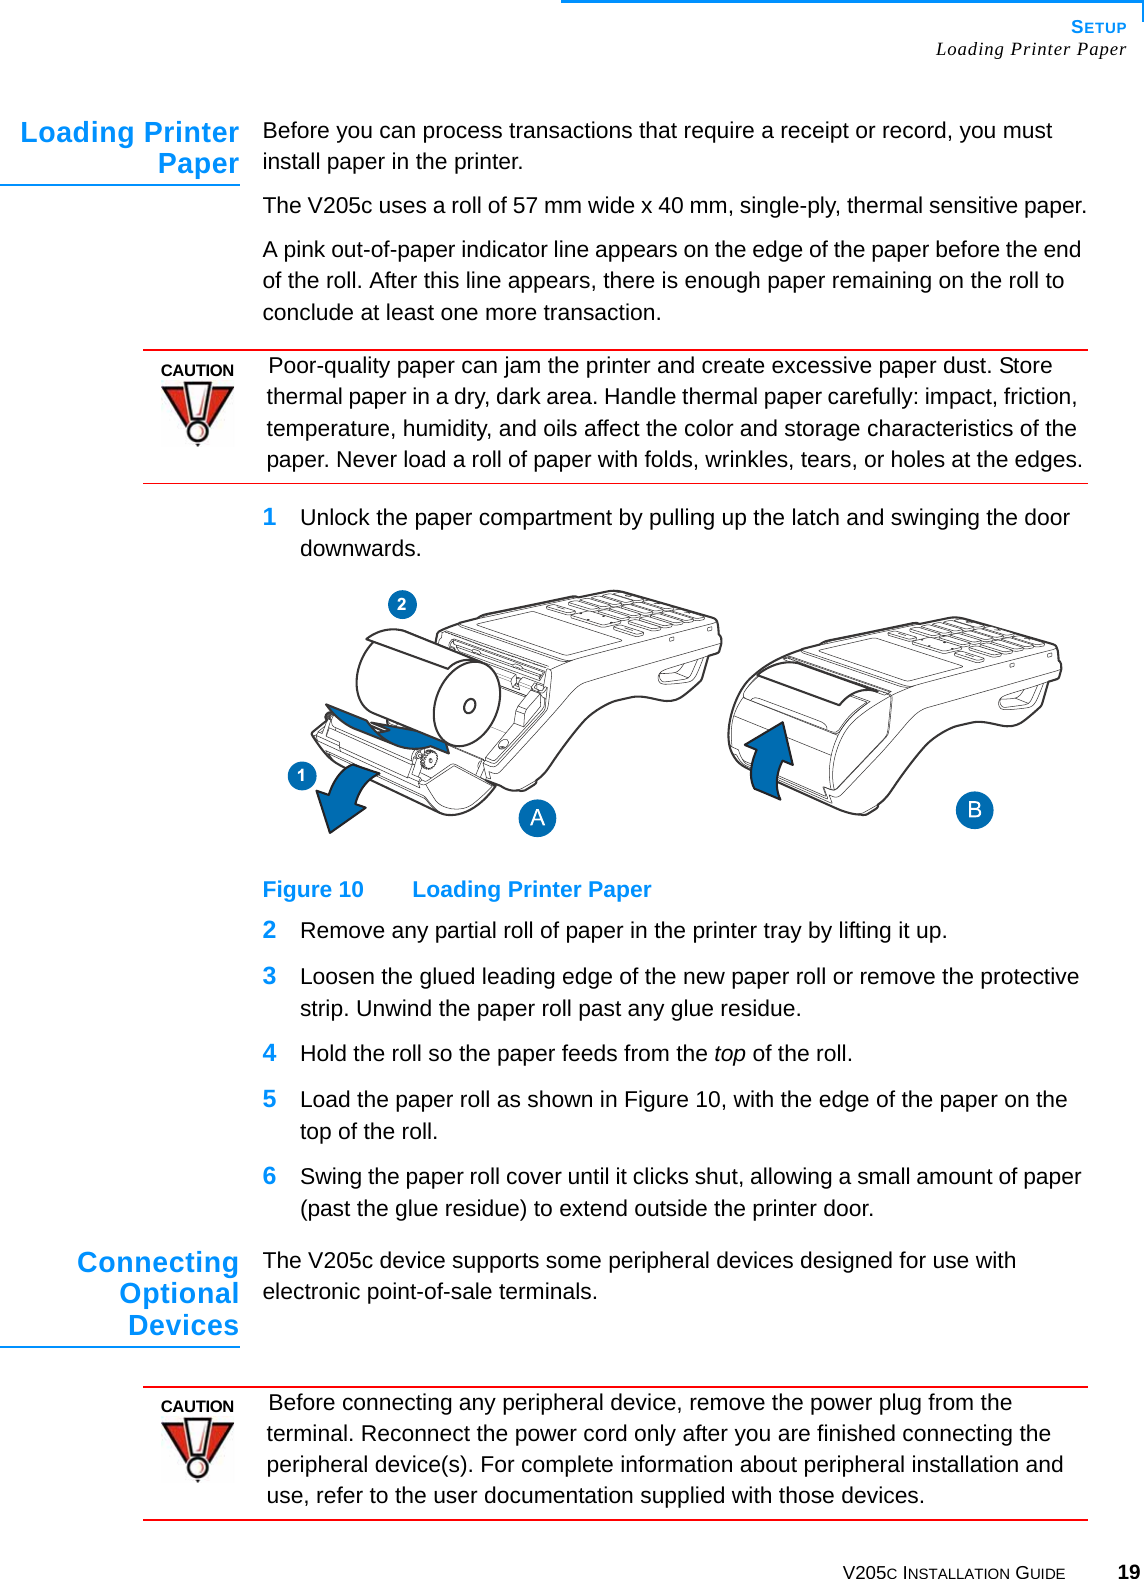 SETUPLoading Printer PaperV205C INSTALLATION GUIDE 19Loading PrinterPaperBefore you can process transactions that require a receipt or record, you must install paper in the printer.The V205c uses a roll of 57 mm wide x 40 mm, single-ply, thermal sensitive paper.A pink out-of-paper indicator line appears on the edge of the paper before the end of the roll. After this line appears, there is enough paper remaining on the roll to conclude at least one more transaction.1Unlock the paper compartment by pulling up the latch and swinging the door downwards.Figure 10 Loading Printer Paper2Remove any partial roll of paper in the printer tray by lifting it up.3Loosen the glued leading edge of the new paper roll or remove the protective strip. Unwind the paper roll past any glue residue.4Hold the roll so the paper feeds from the top of the roll.5Load the paper roll as shown in Figure 10, with the edge of the paper on the top of the roll.6Swing the paper roll cover until it clicks shut, allowing a small amount of paper (past the glue residue) to extend outside the printer door.ConnectingOptionalDevicesThe V205c device supports some peripheral devices designed for use with electronic point-of-sale terminals.CAUTIONPoor-quality paper can jam the printer and create excessive paper dust. Store thermal paper in a dry, dark area. Handle thermal paper carefully: impact, friction, temperature, humidity, and oils affect the color and storage characteristics of the paper. Never load a roll of paper with folds, wrinkles, tears, or holes at the edges.12CAUTIONBefore connecting any peripheral device, remove the power plug from the terminal. Reconnect the power cord only after you are finished connecting the peripheral device(s). For complete information about peripheral installation and use, refer to the user documentation supplied with those devices.